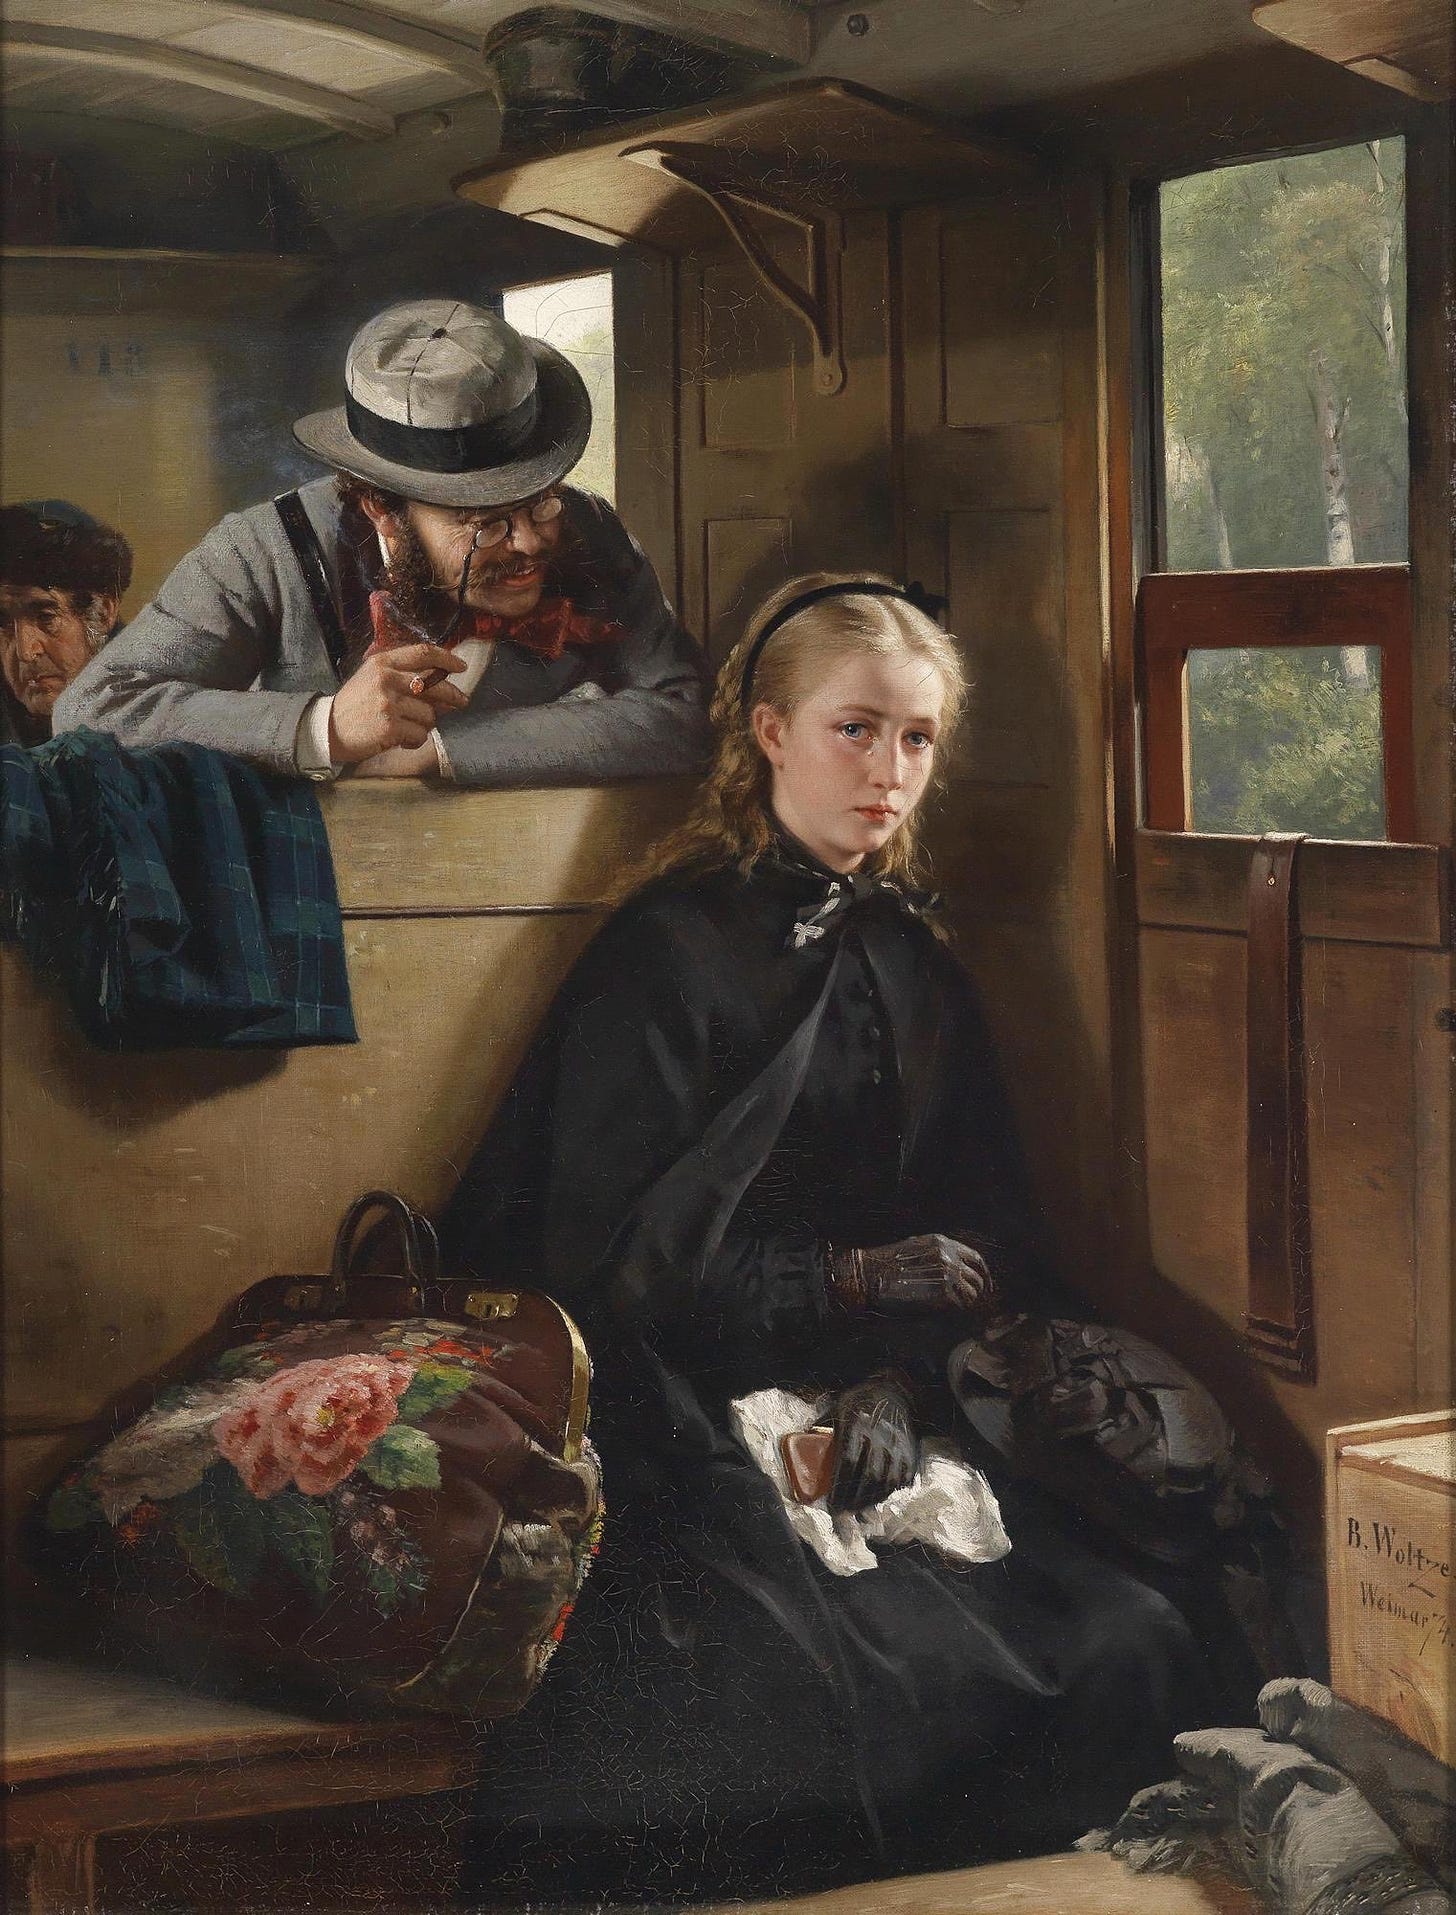 A teenage girl sits alone in a railway carriage. She is looking very uncomfortable, perhaps distressed. Leaning over from the seat behind is a leering talking man, invading her space.